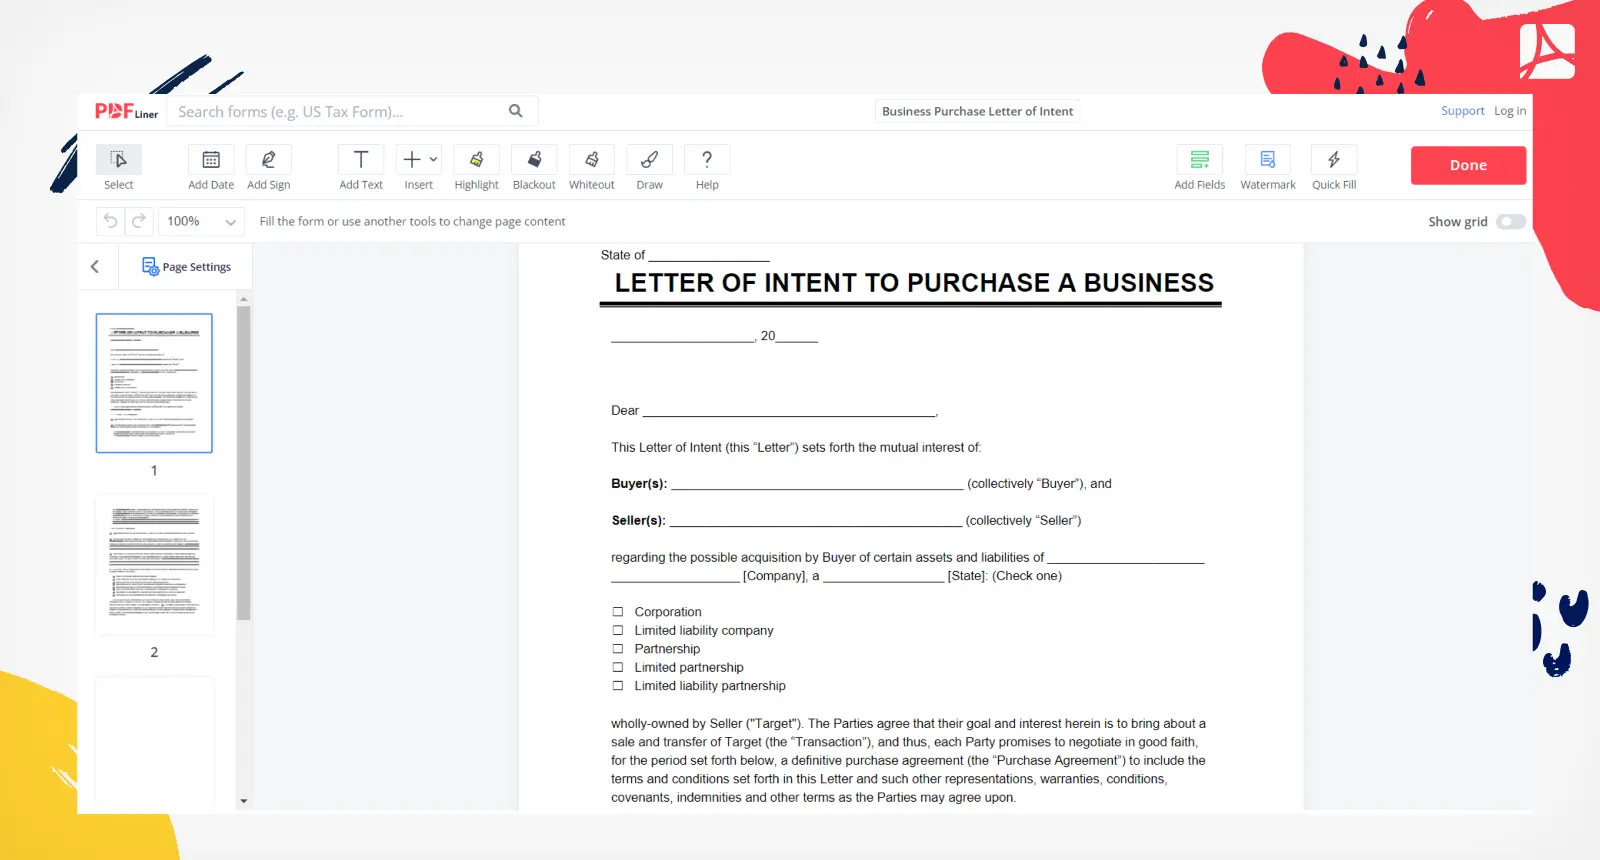 Business Purchase Letter of Intent Form Screenshot